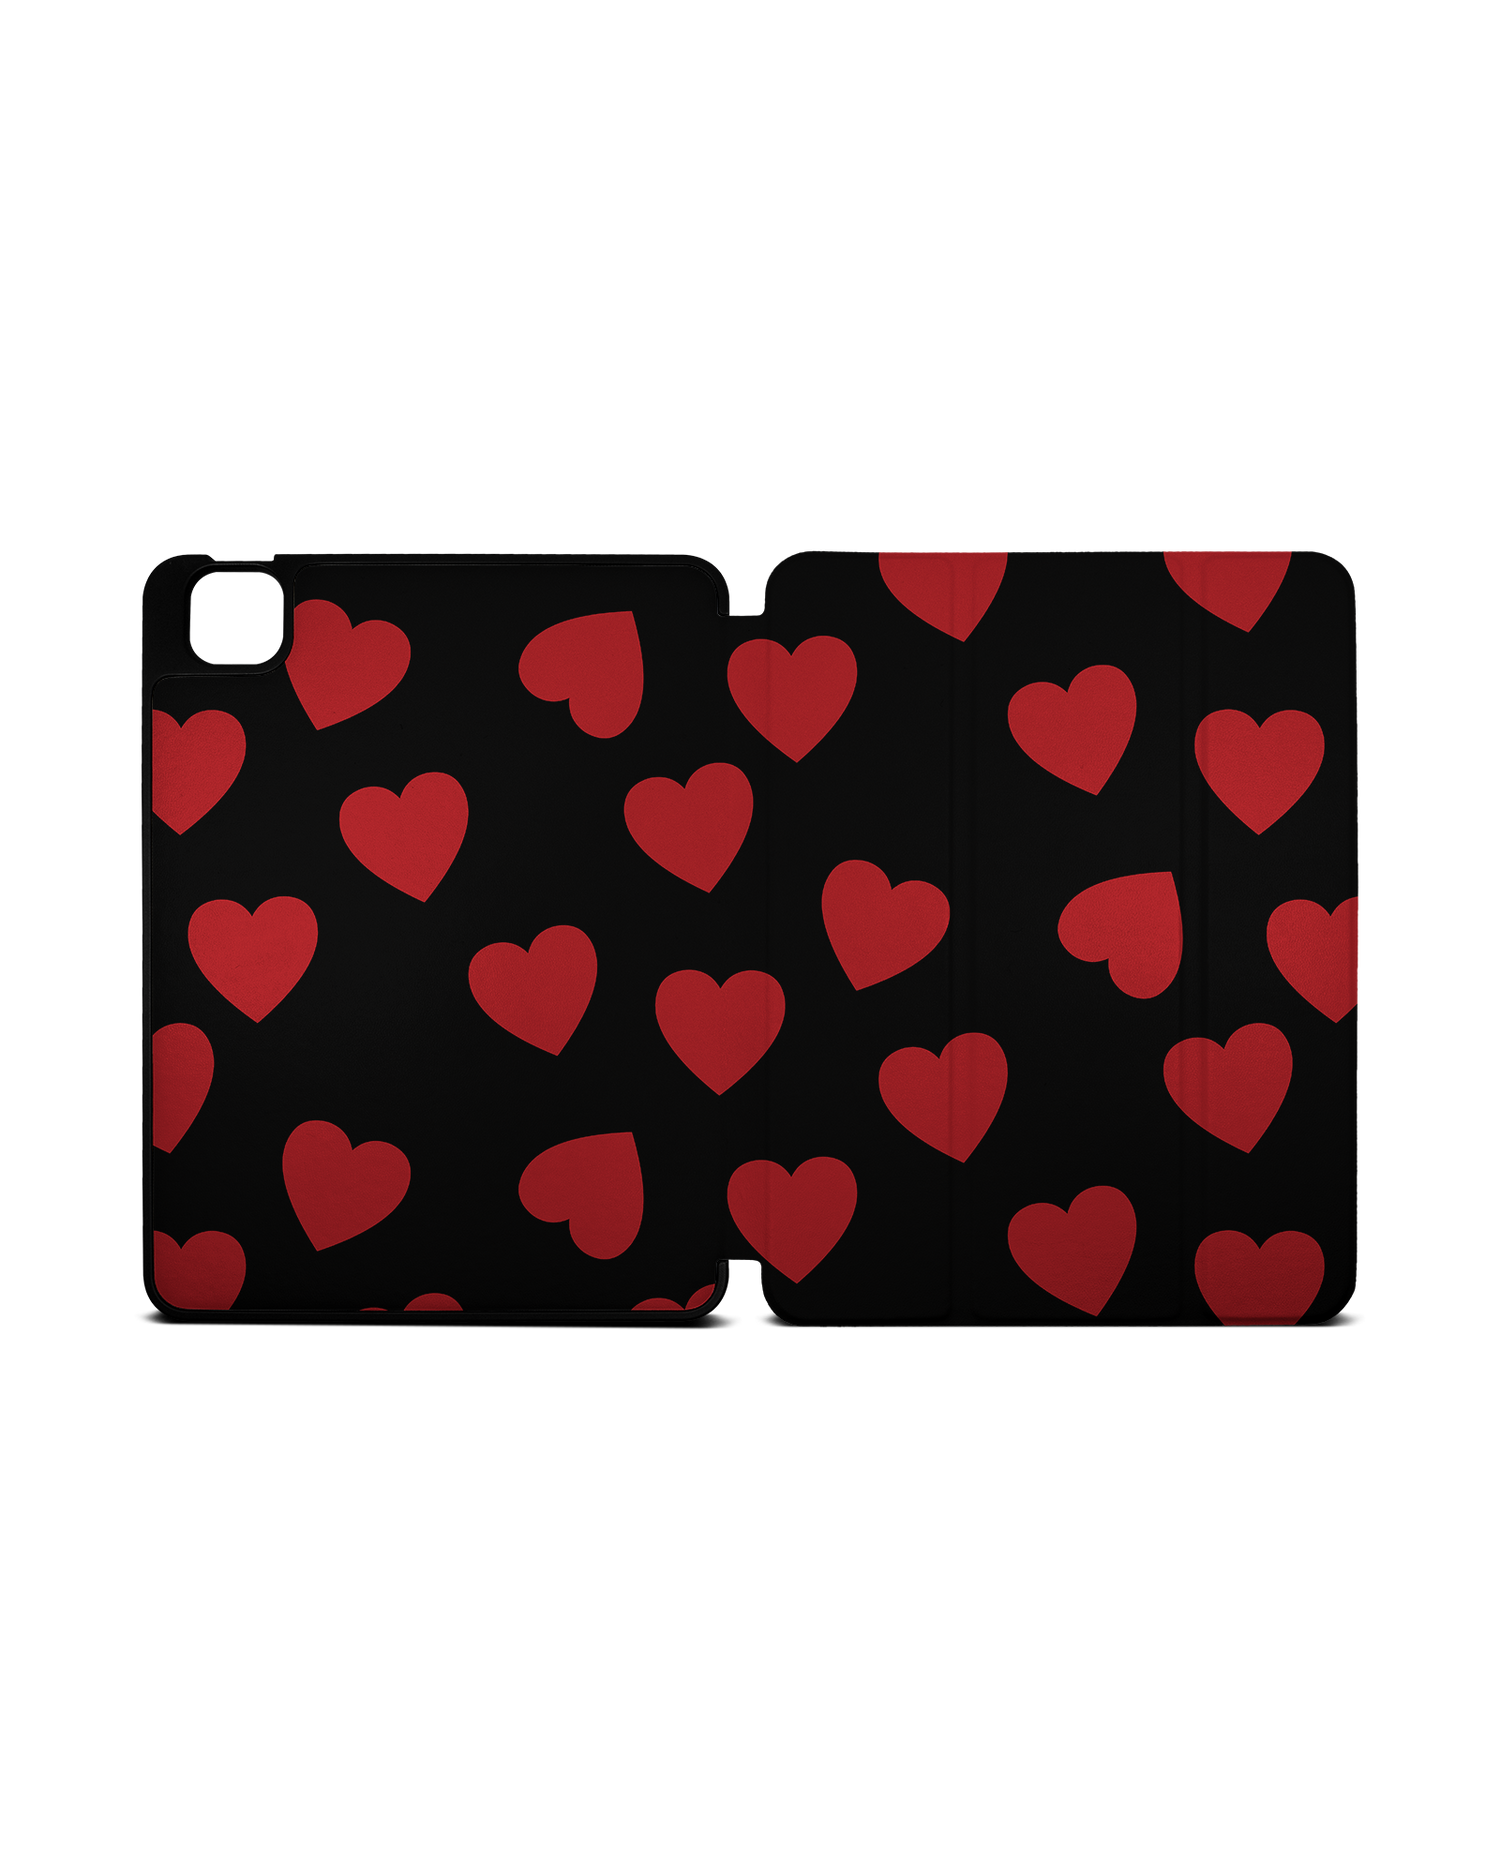 Repeating Hearts iPad Case with Pencil Holder Apple iPad Pro 11